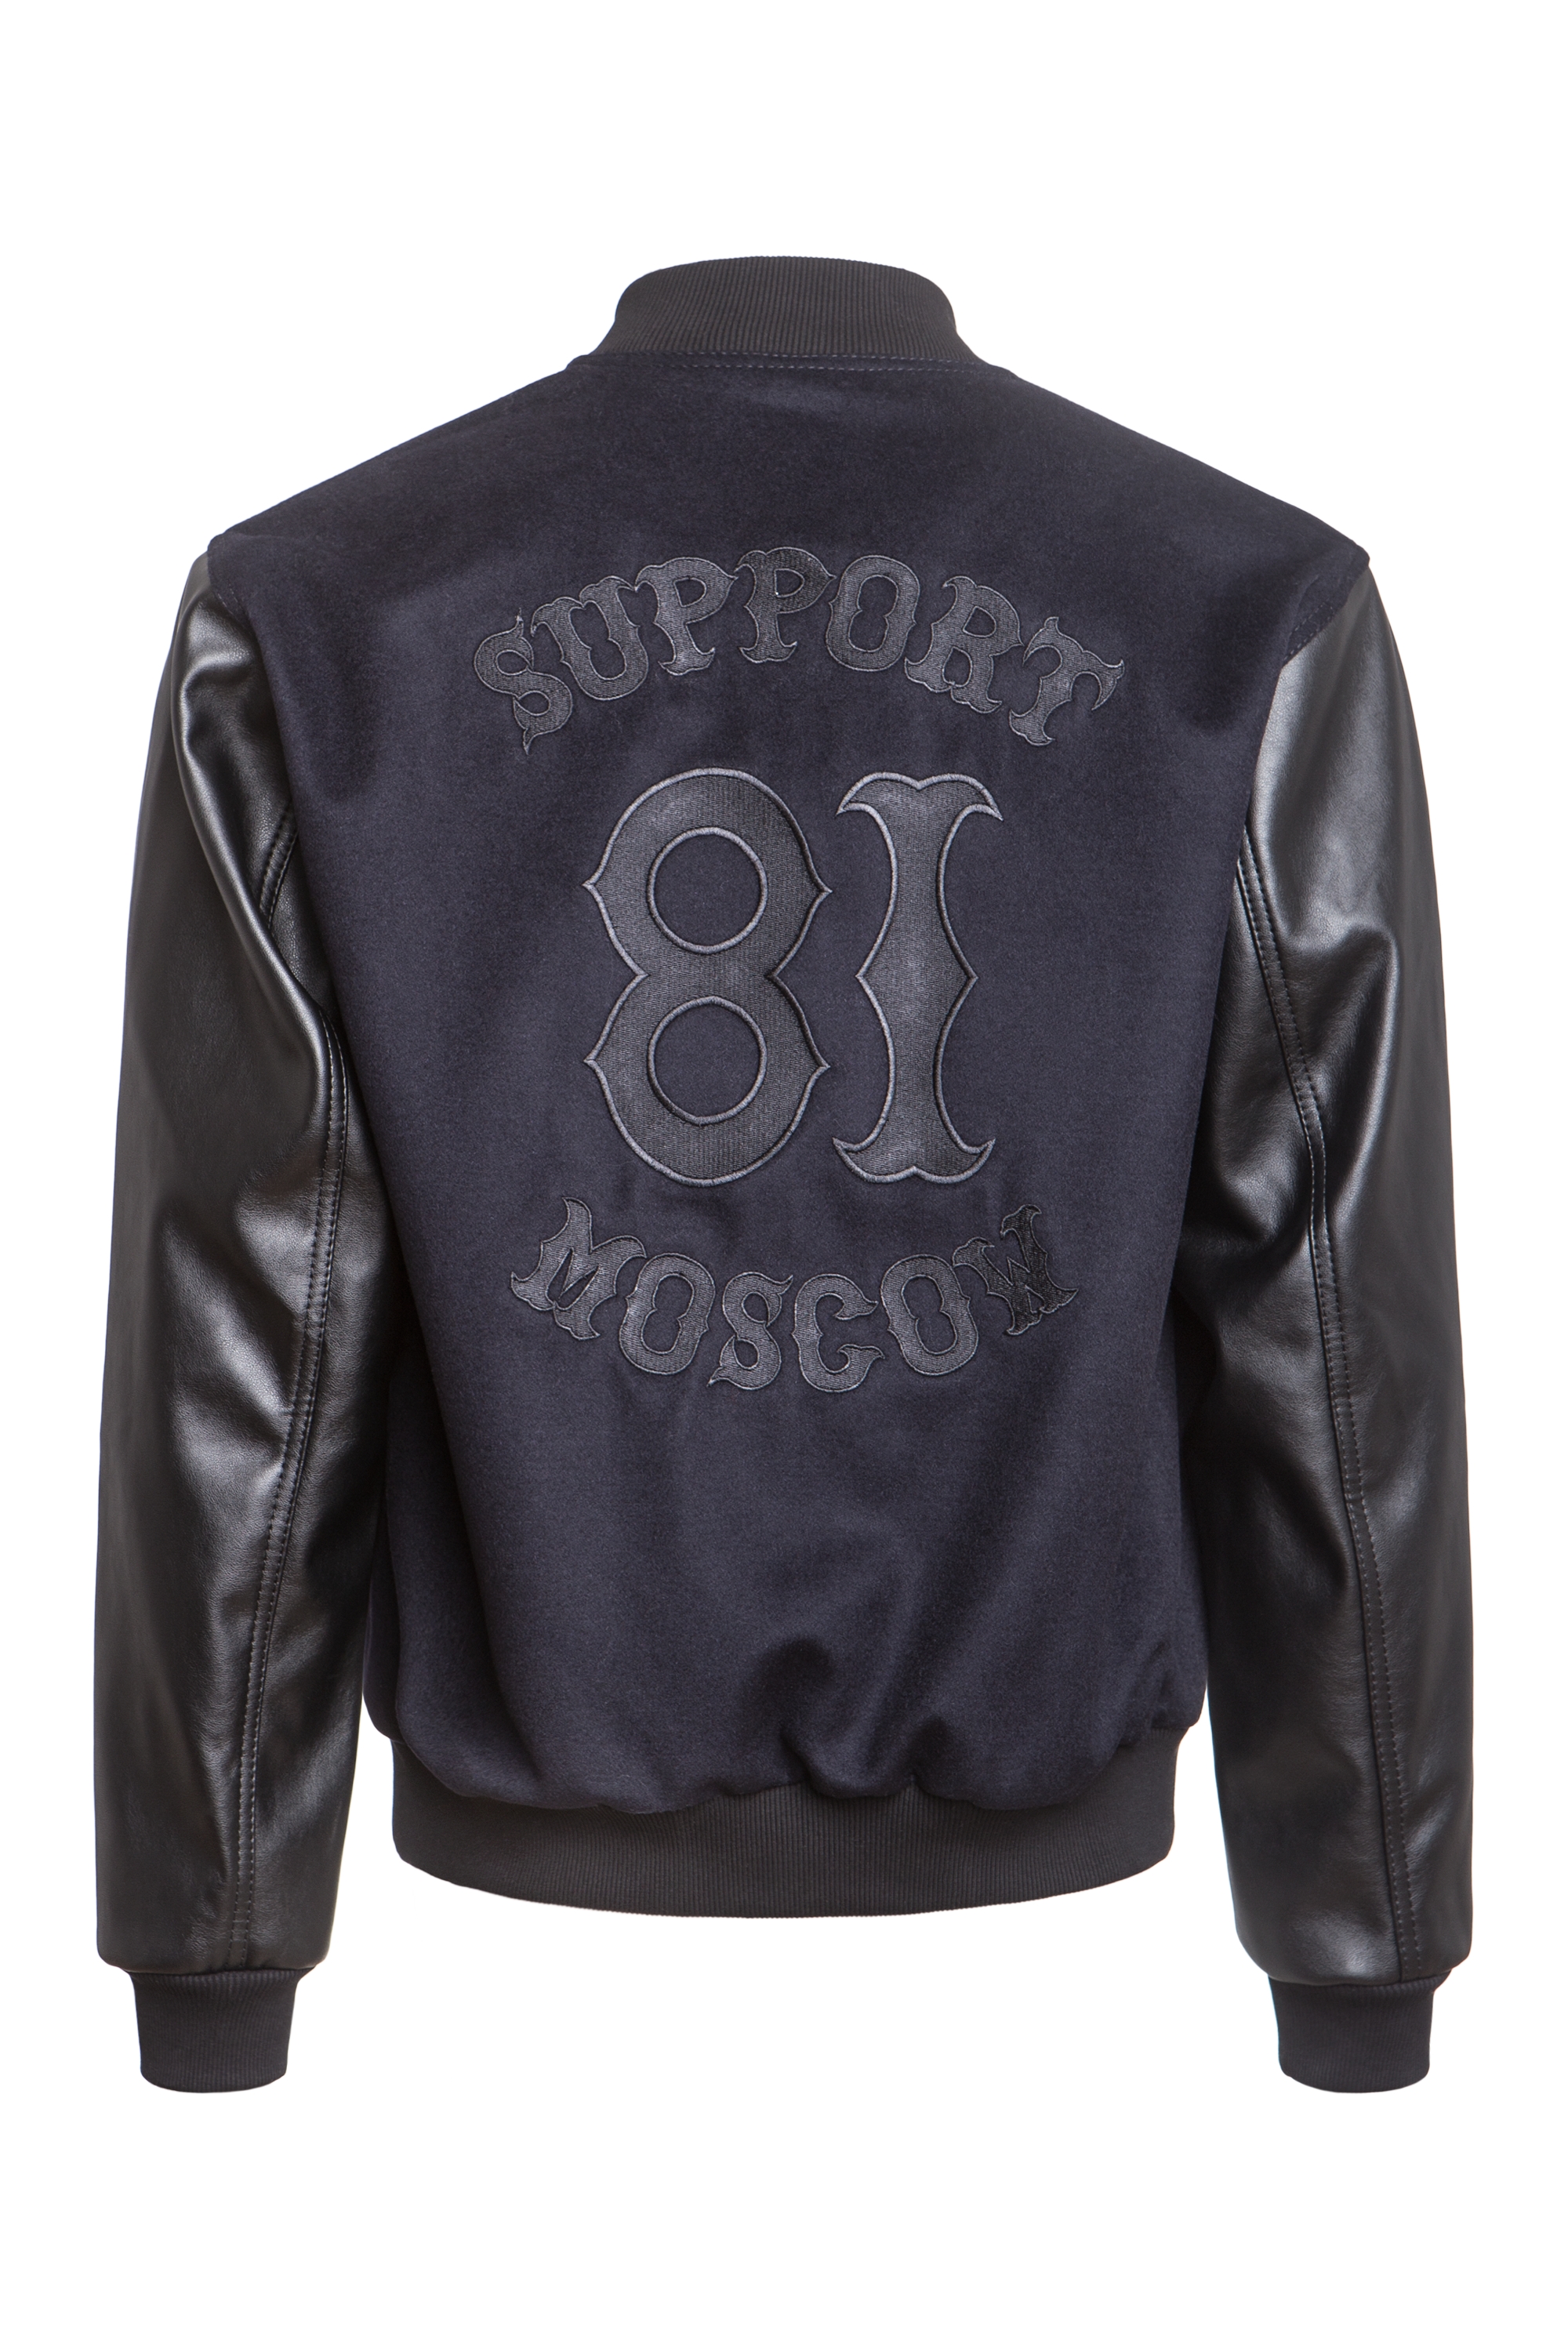 Jacket | Support 81 Moscow Russia